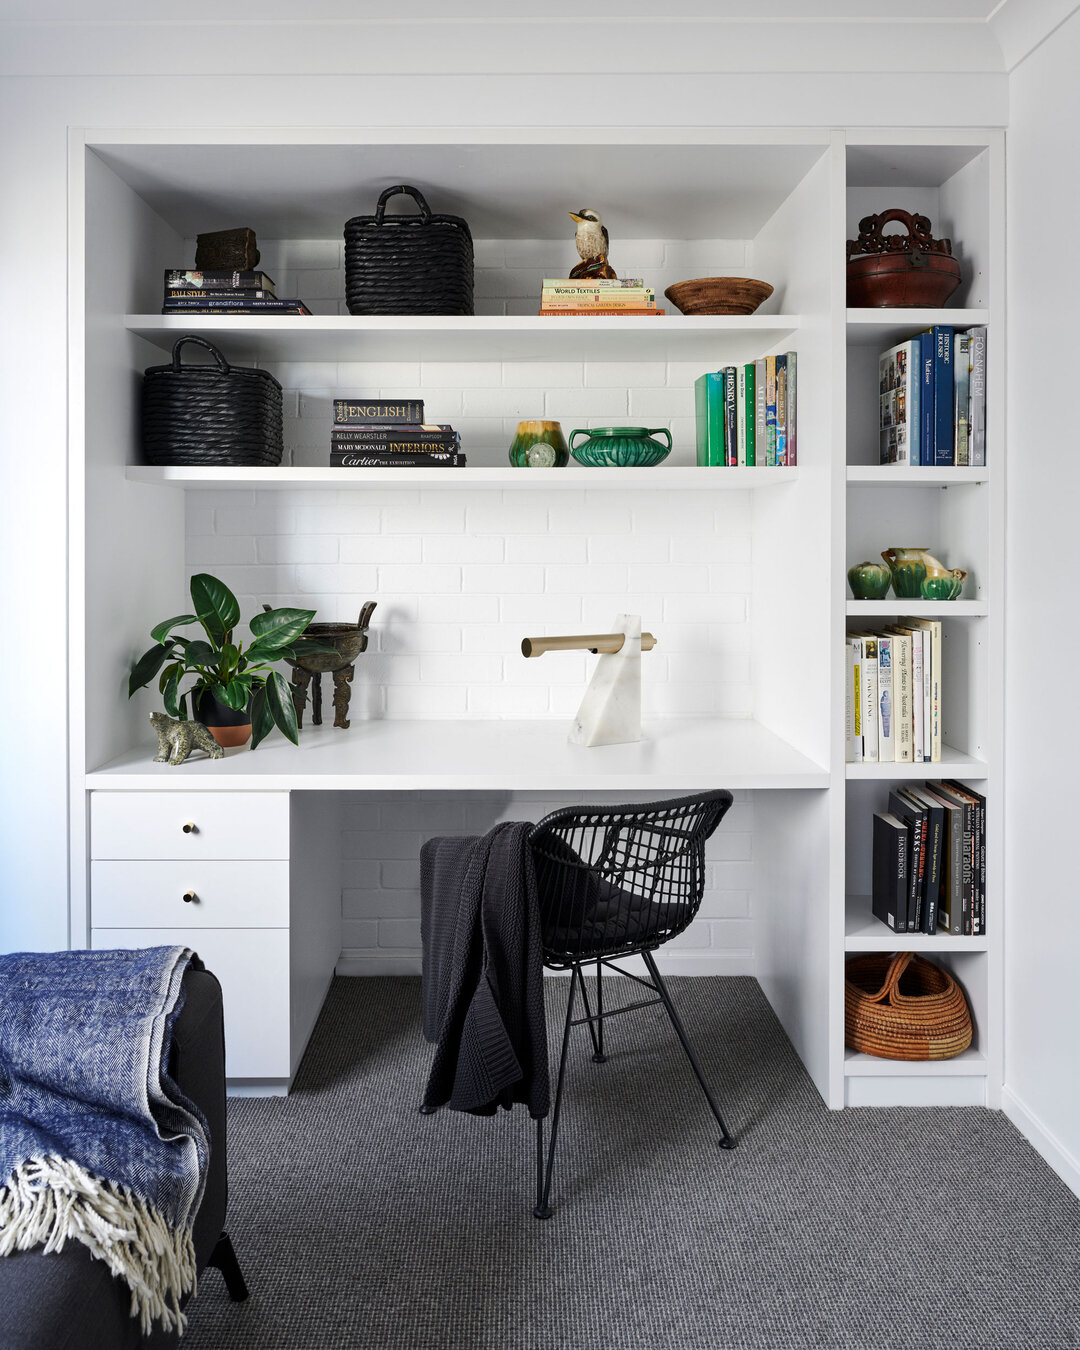 PORT STEPHENS HOUSE I - A deep desk and shelving provide ample workspace, allowing for productivity and organisation. Behind, an exposed painted brick wall adds an industrial yet artistic backdrop. Charcoal wool carpet grounds the space, creating a c